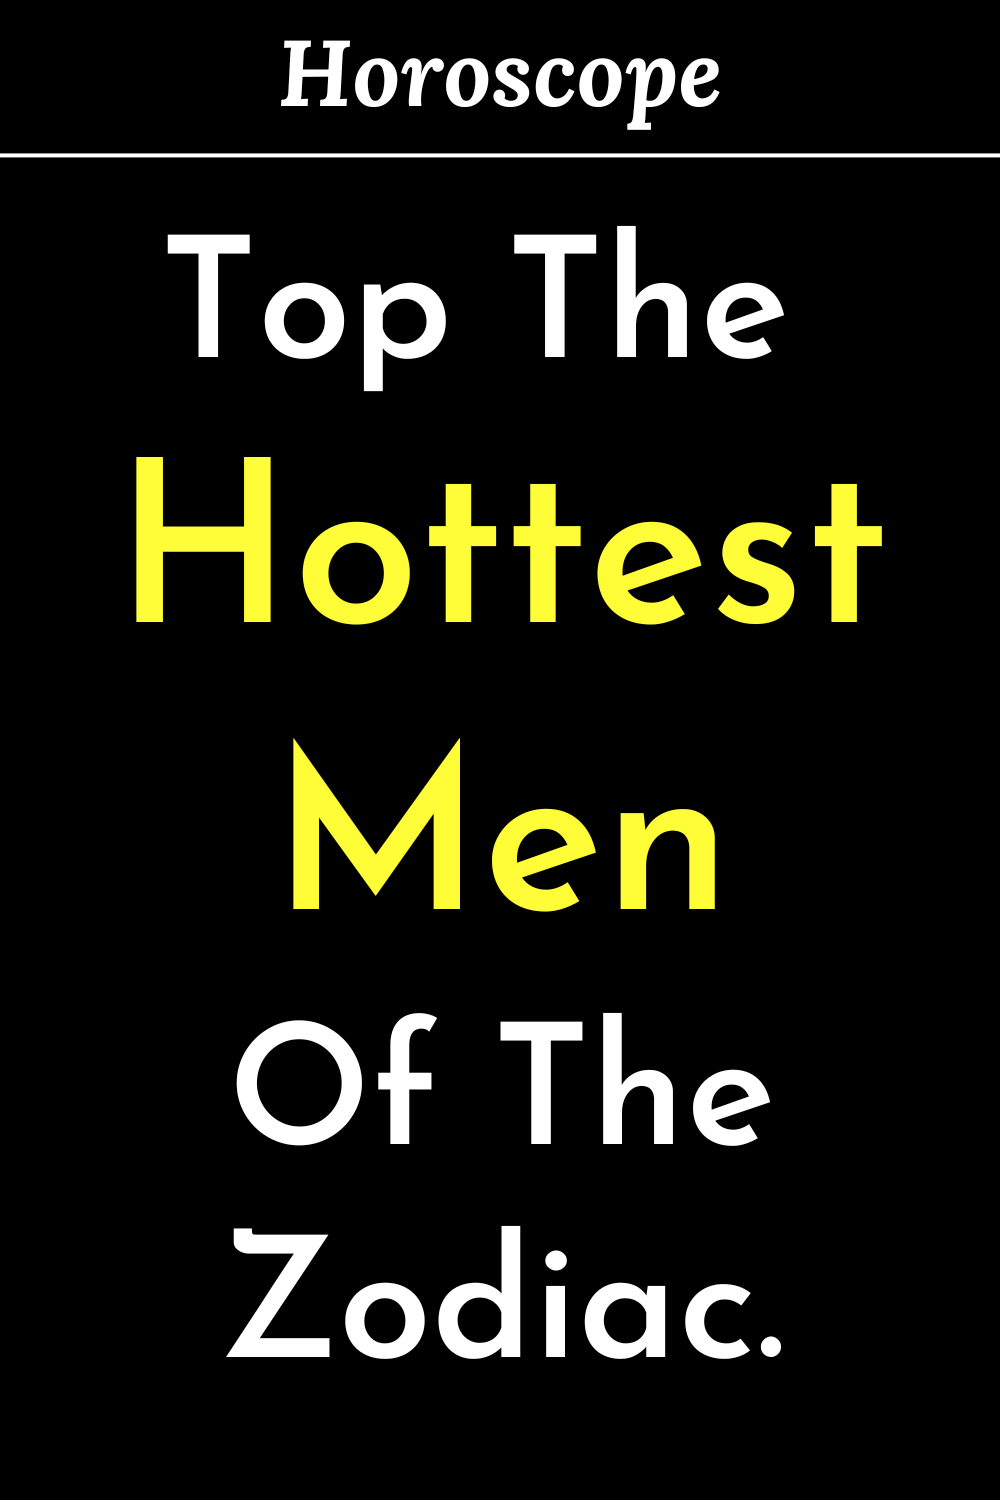 Top The Hottest Men Of The Zodiac.